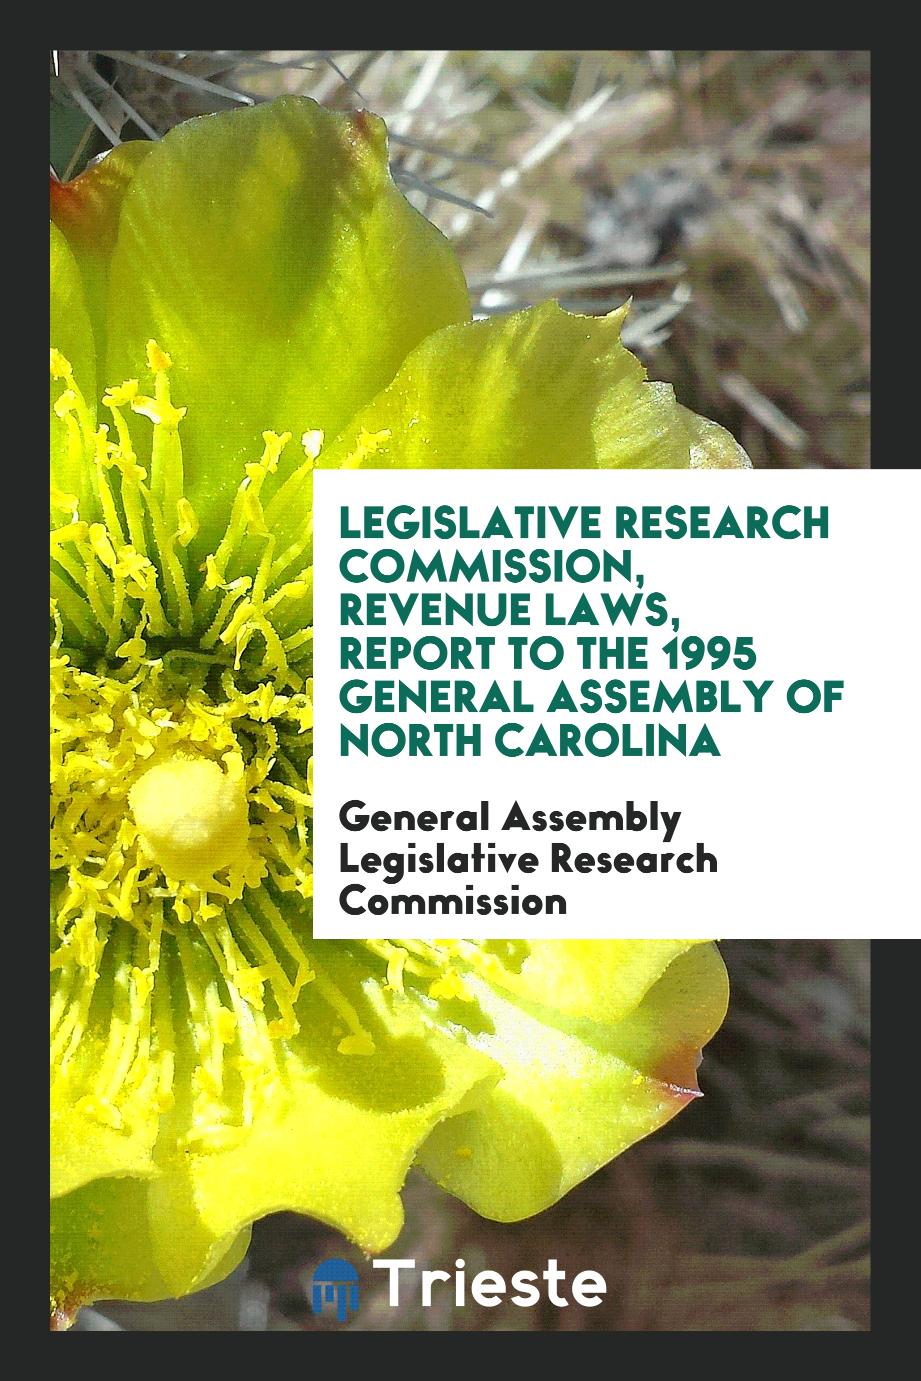 Legislative research commission, Revenue laws, report to the 1995 general assembly of North Carolina